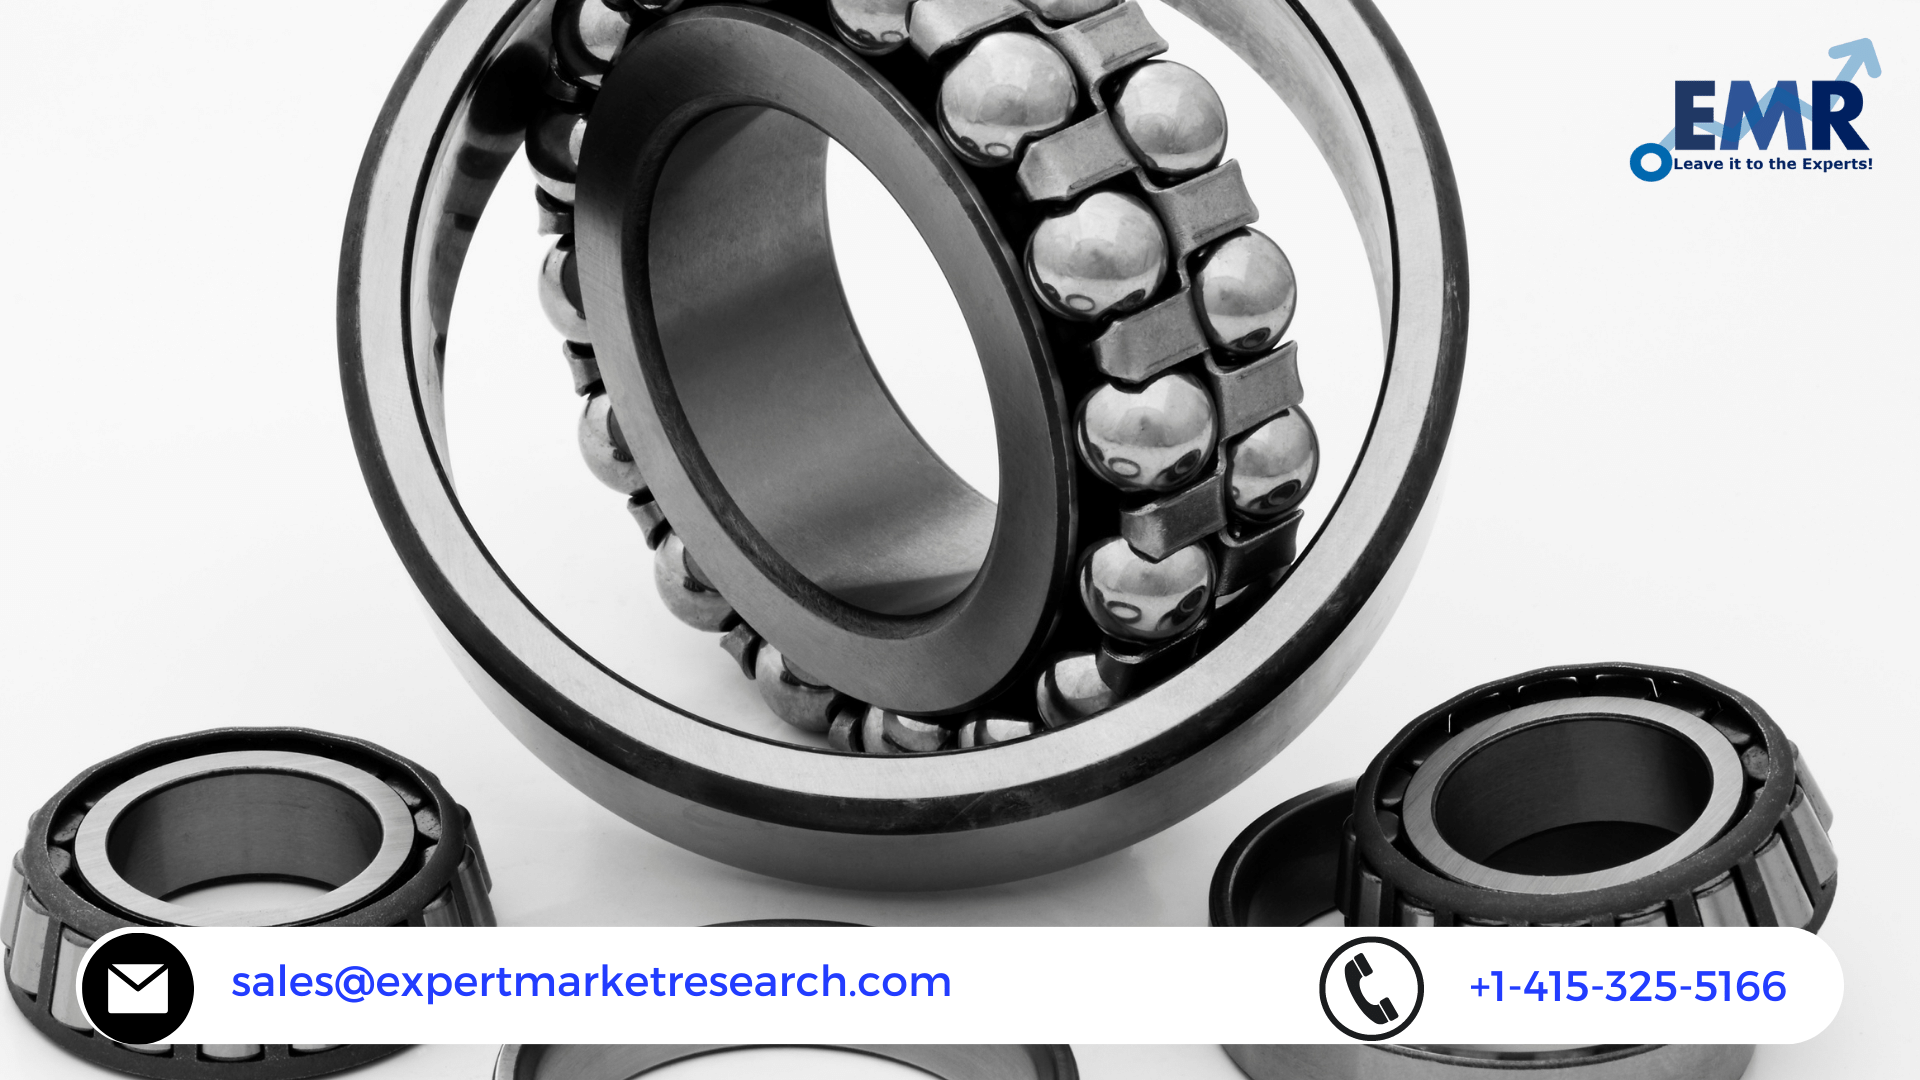 Ceramic Ball Bearings Market Size, Share, Report, Growth, Analysis, Price, Trends, Key Players and Forecast Period 2022-2027